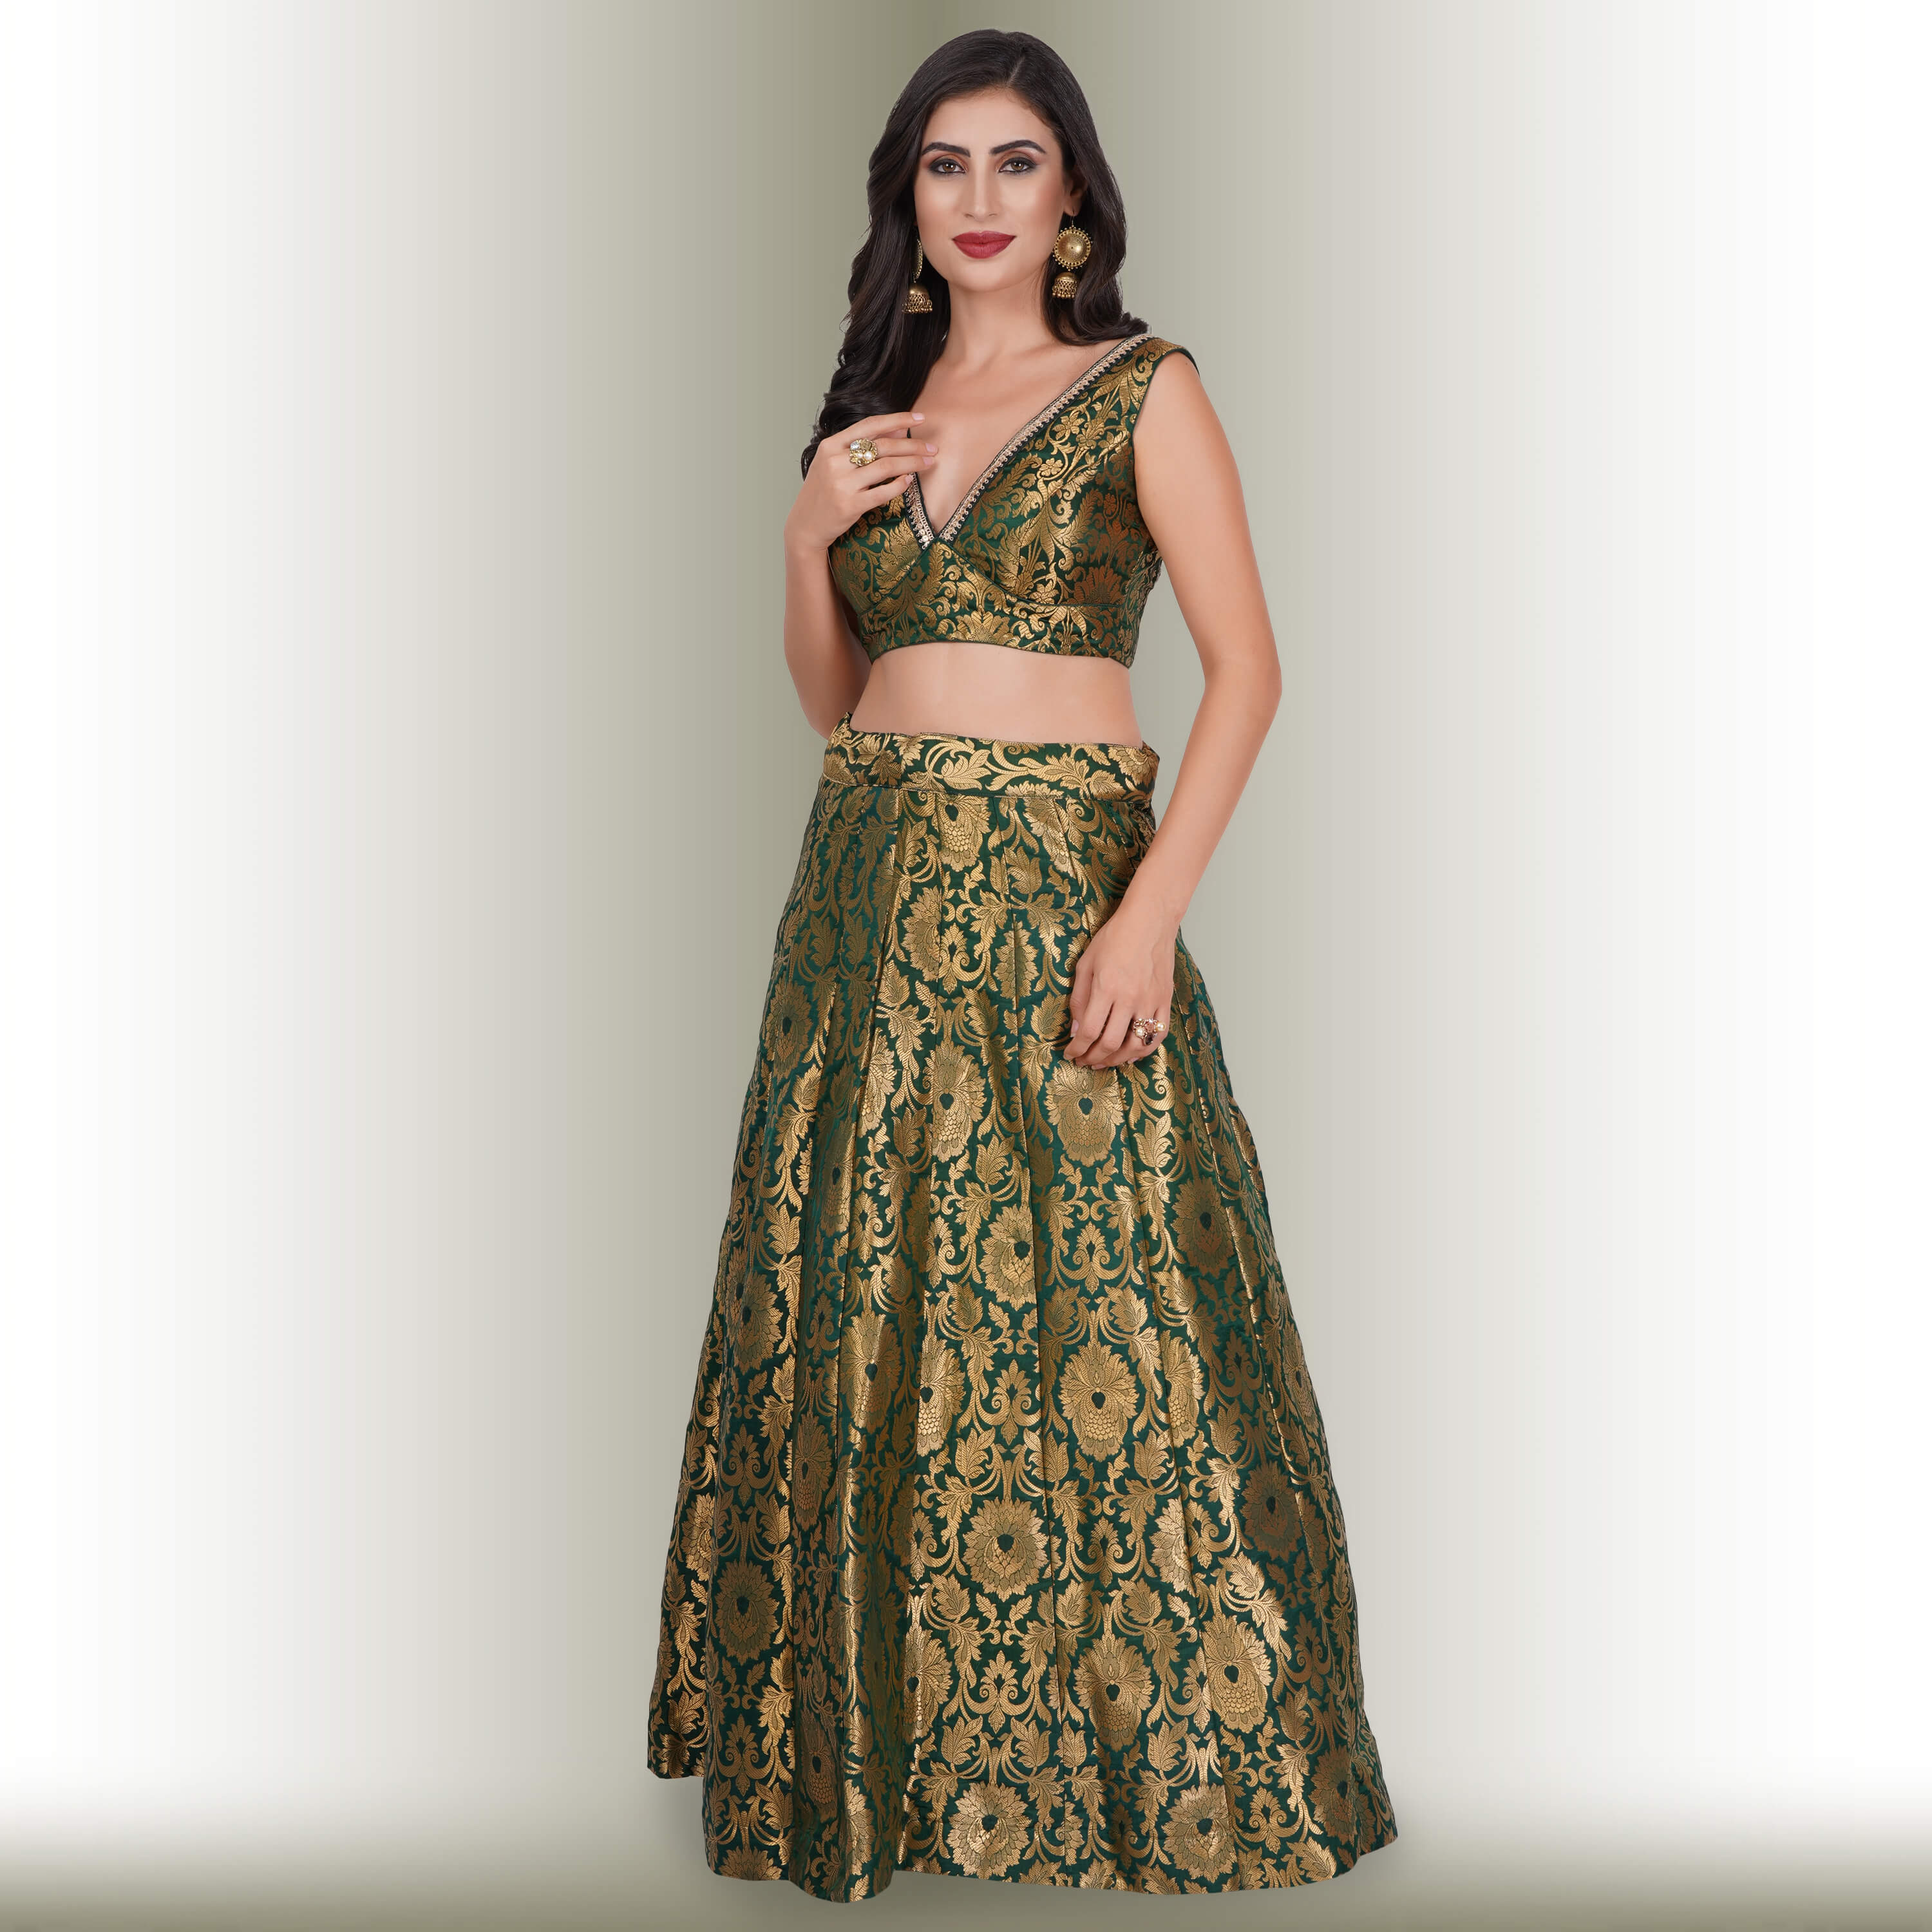 Buy Off White Woven Brocade Boat Neck Lehenga With Back Drape Top For Women  by I am Design Online at Aza Fashions.